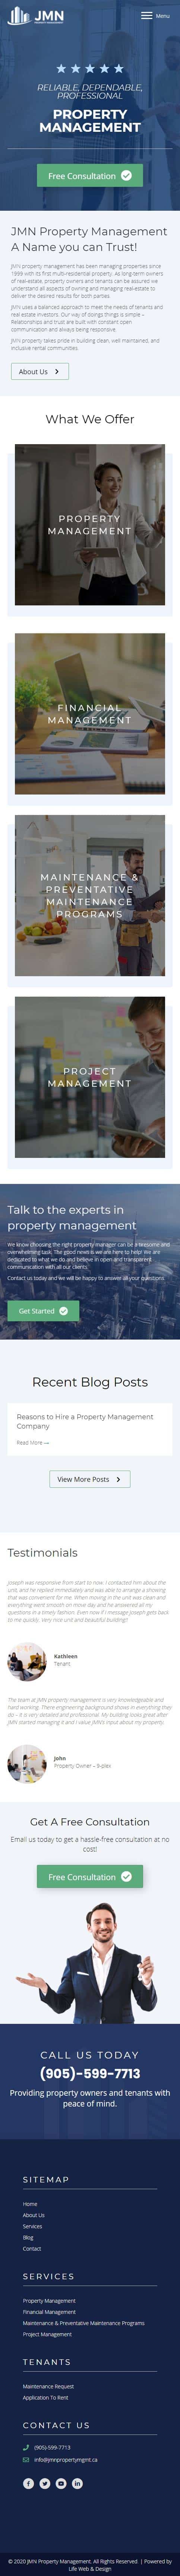 mobile view web design project for Toronto property management company